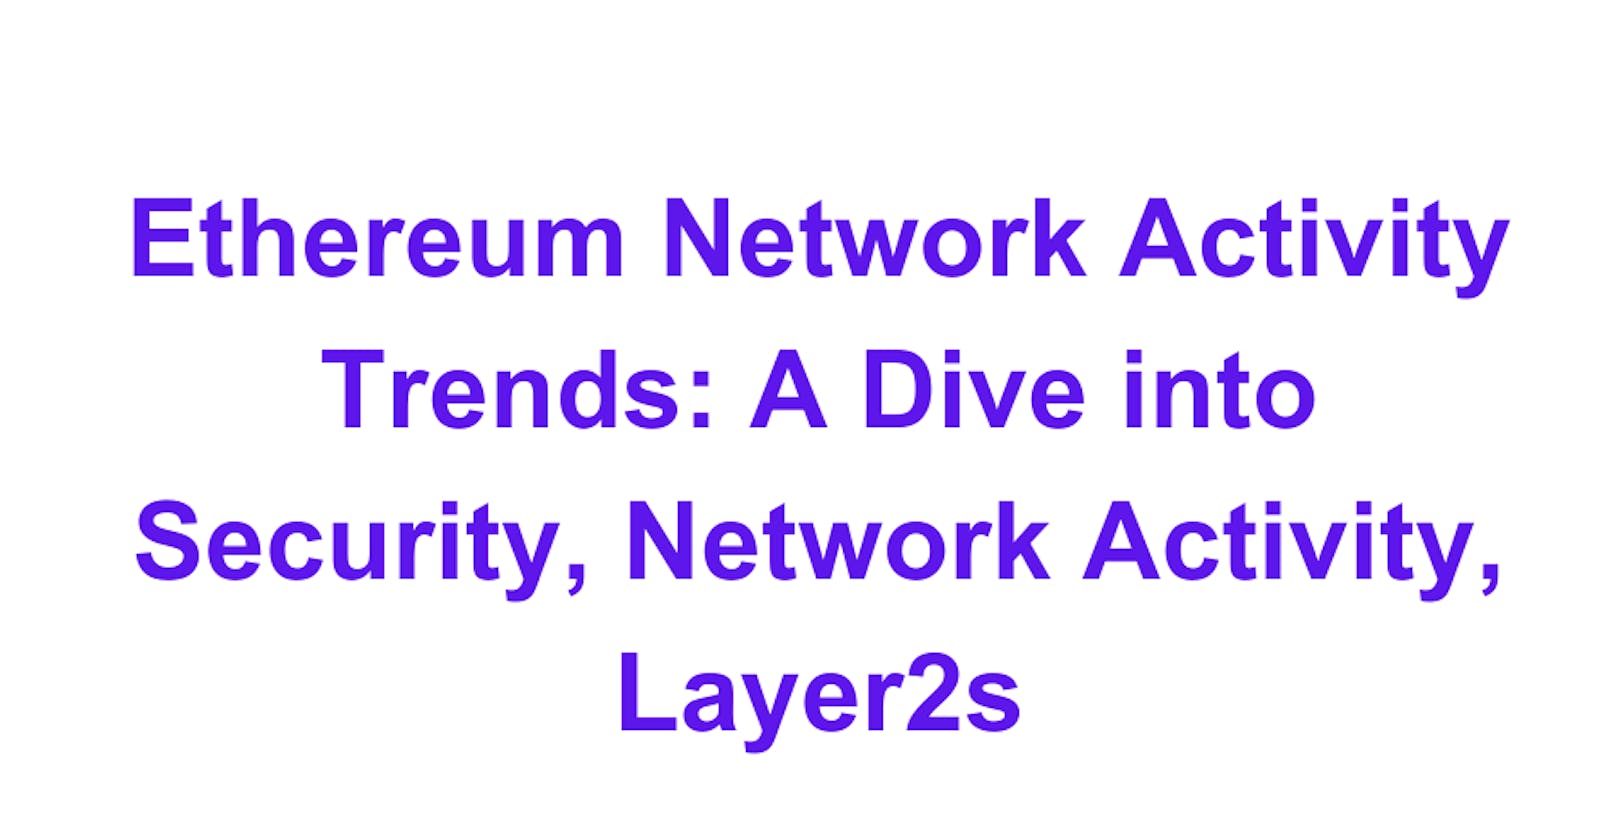 Ethereum Network Activity Trends: A Dive into Security, Network Activity, Layer2s